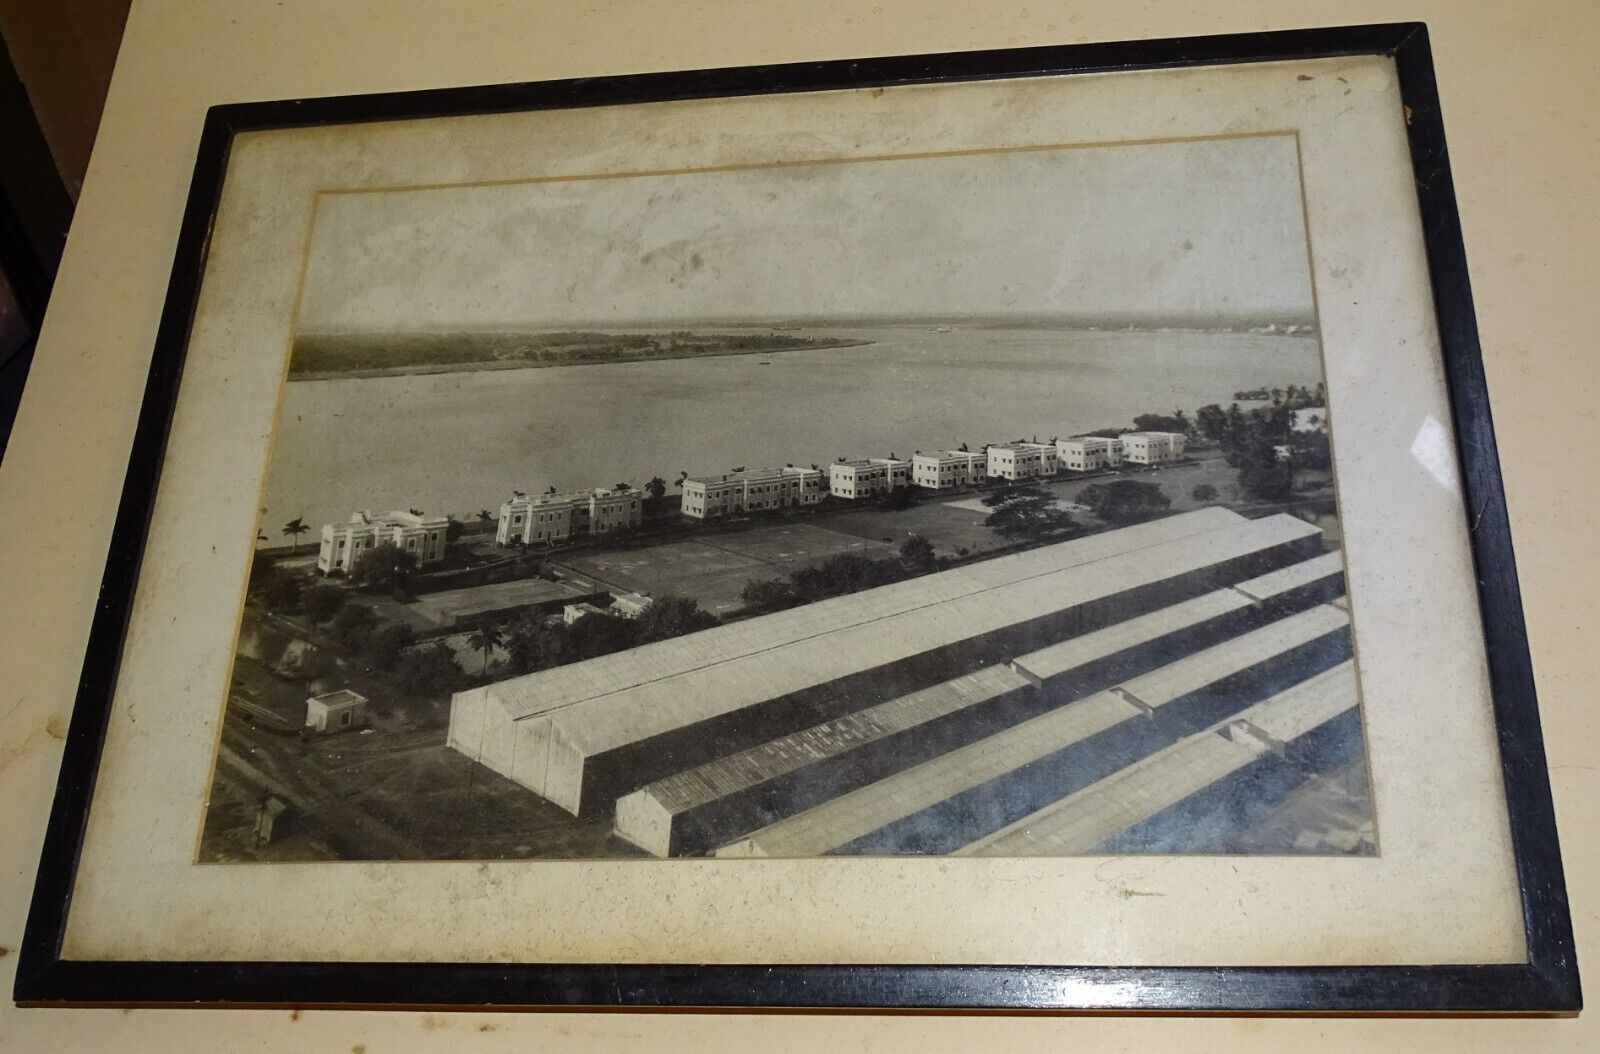 Bengal Calcutta India old framed riverfront photograph as found 1920s